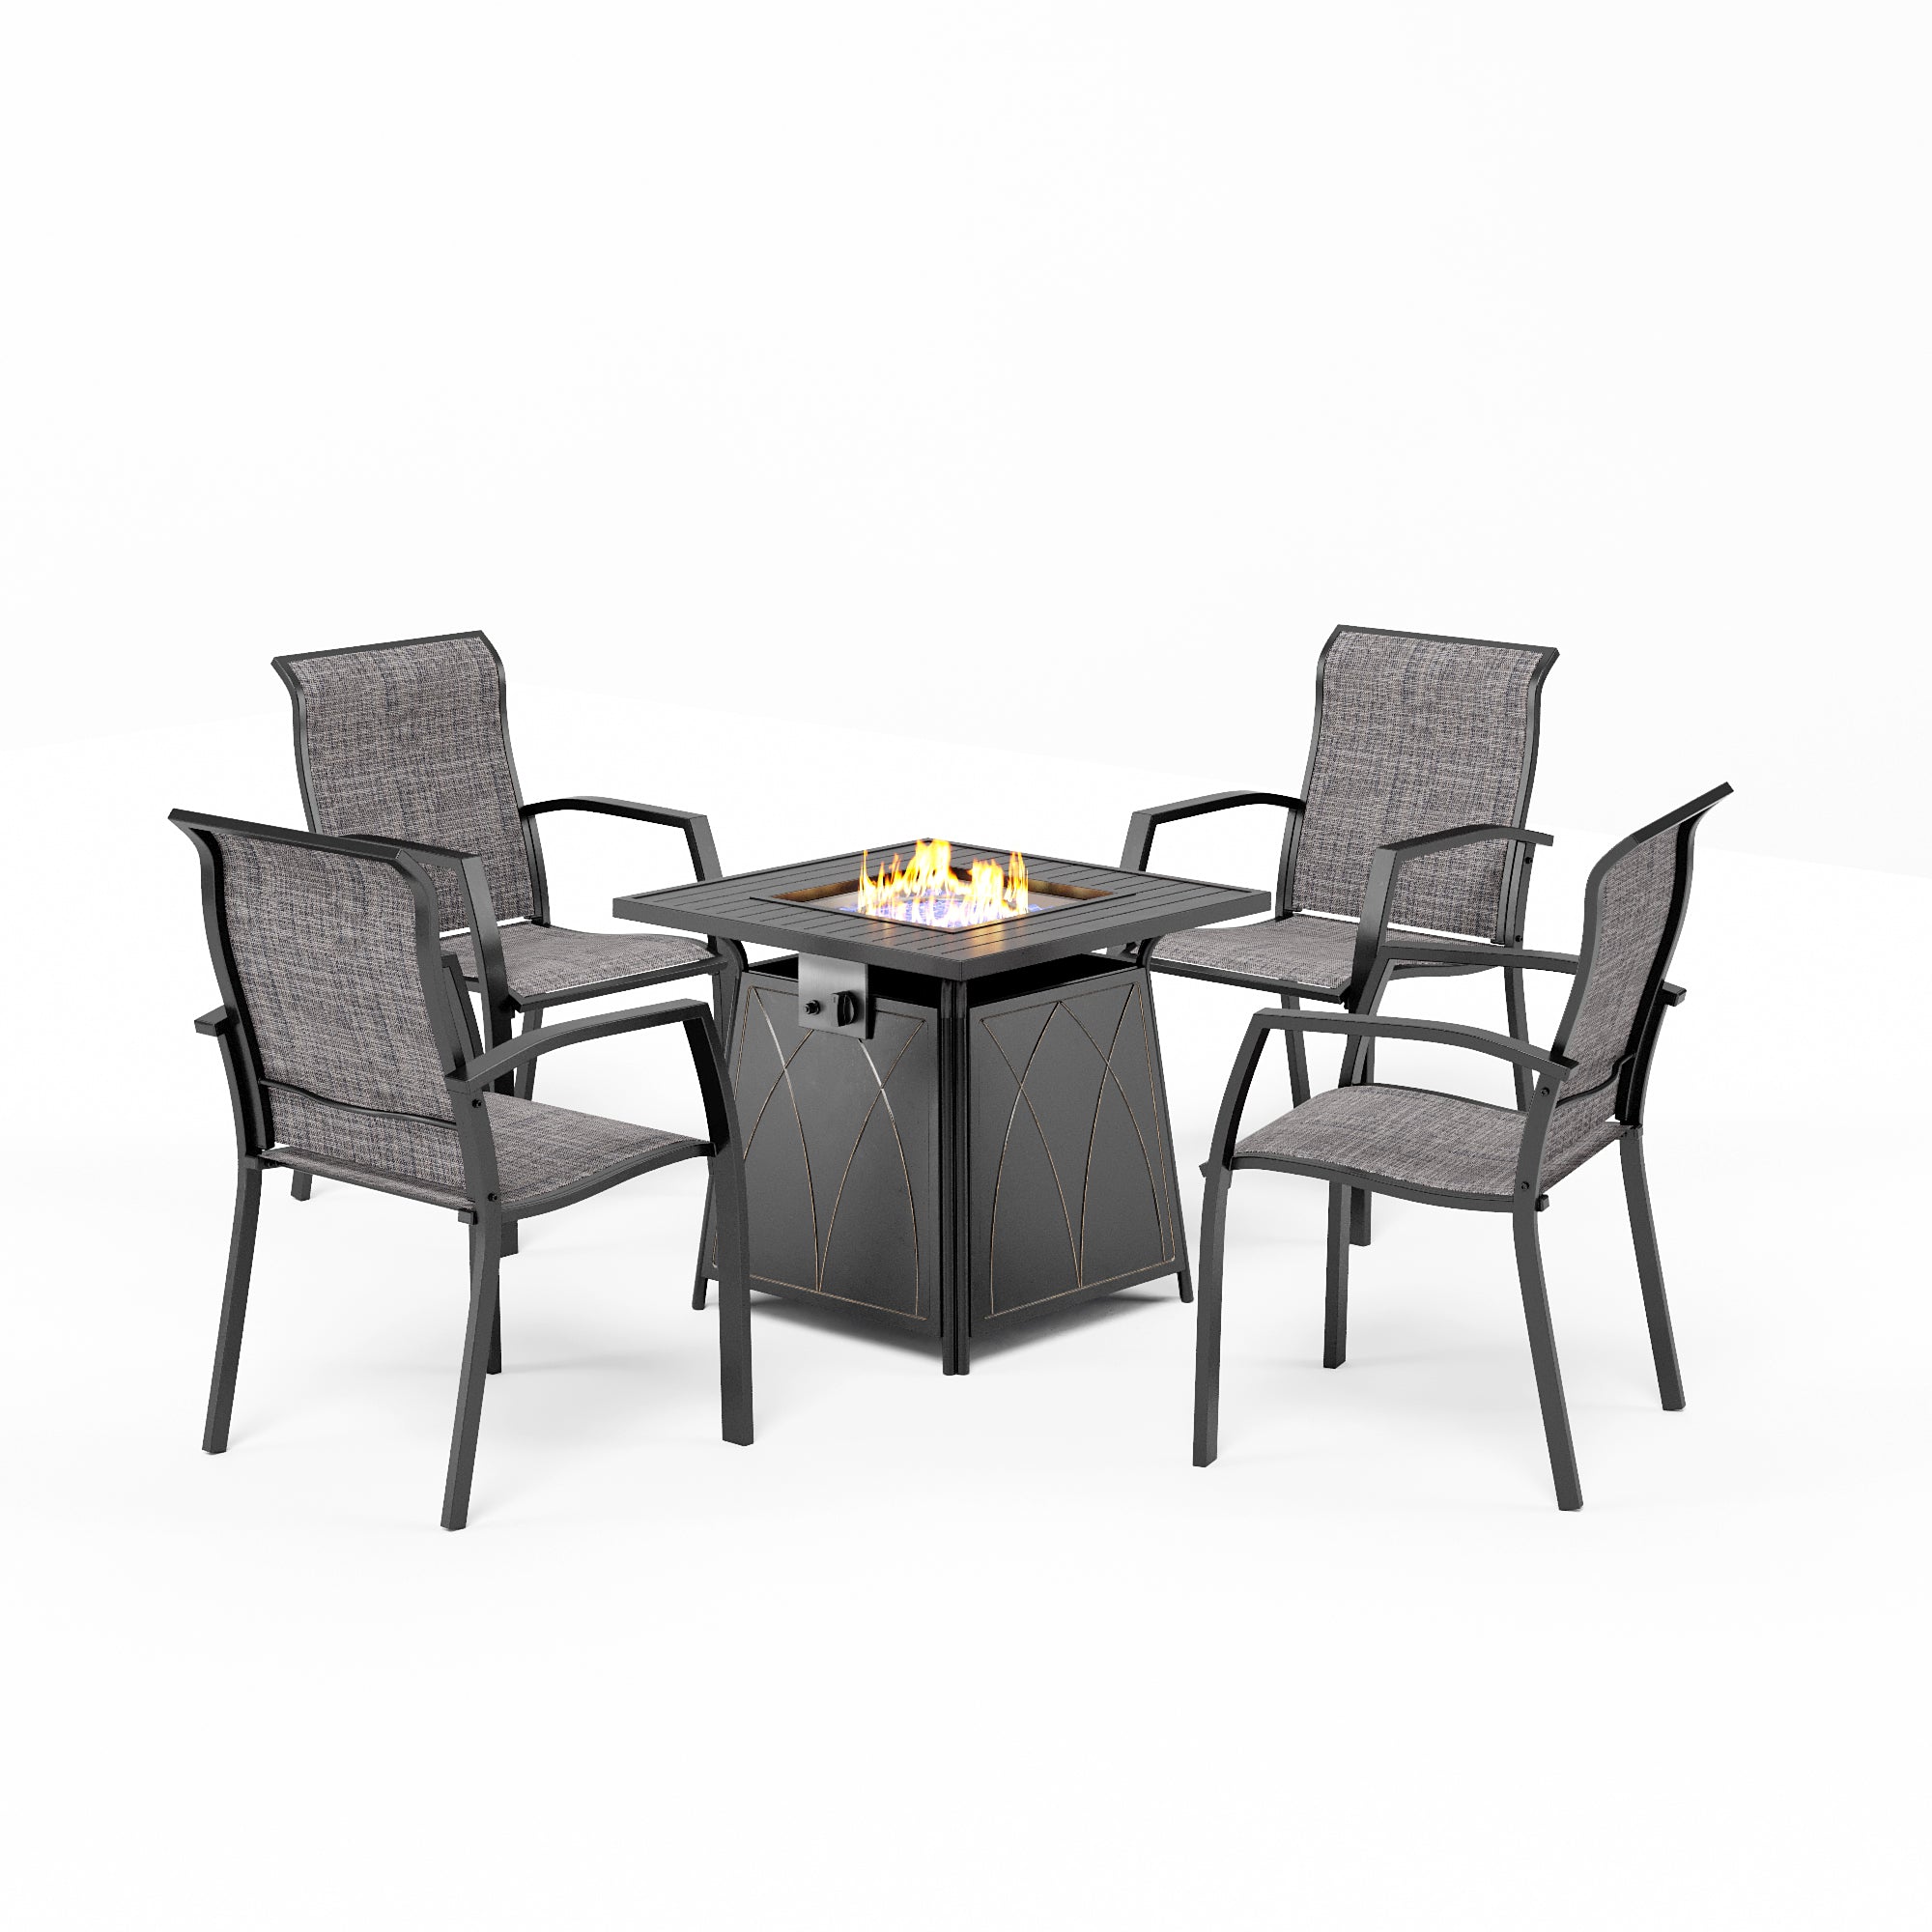 PHI VILLA 5-Piece 28" Gas Fire Pit Table & Simple Aluminum Textilene Fixed Chairs Patio Dining Set